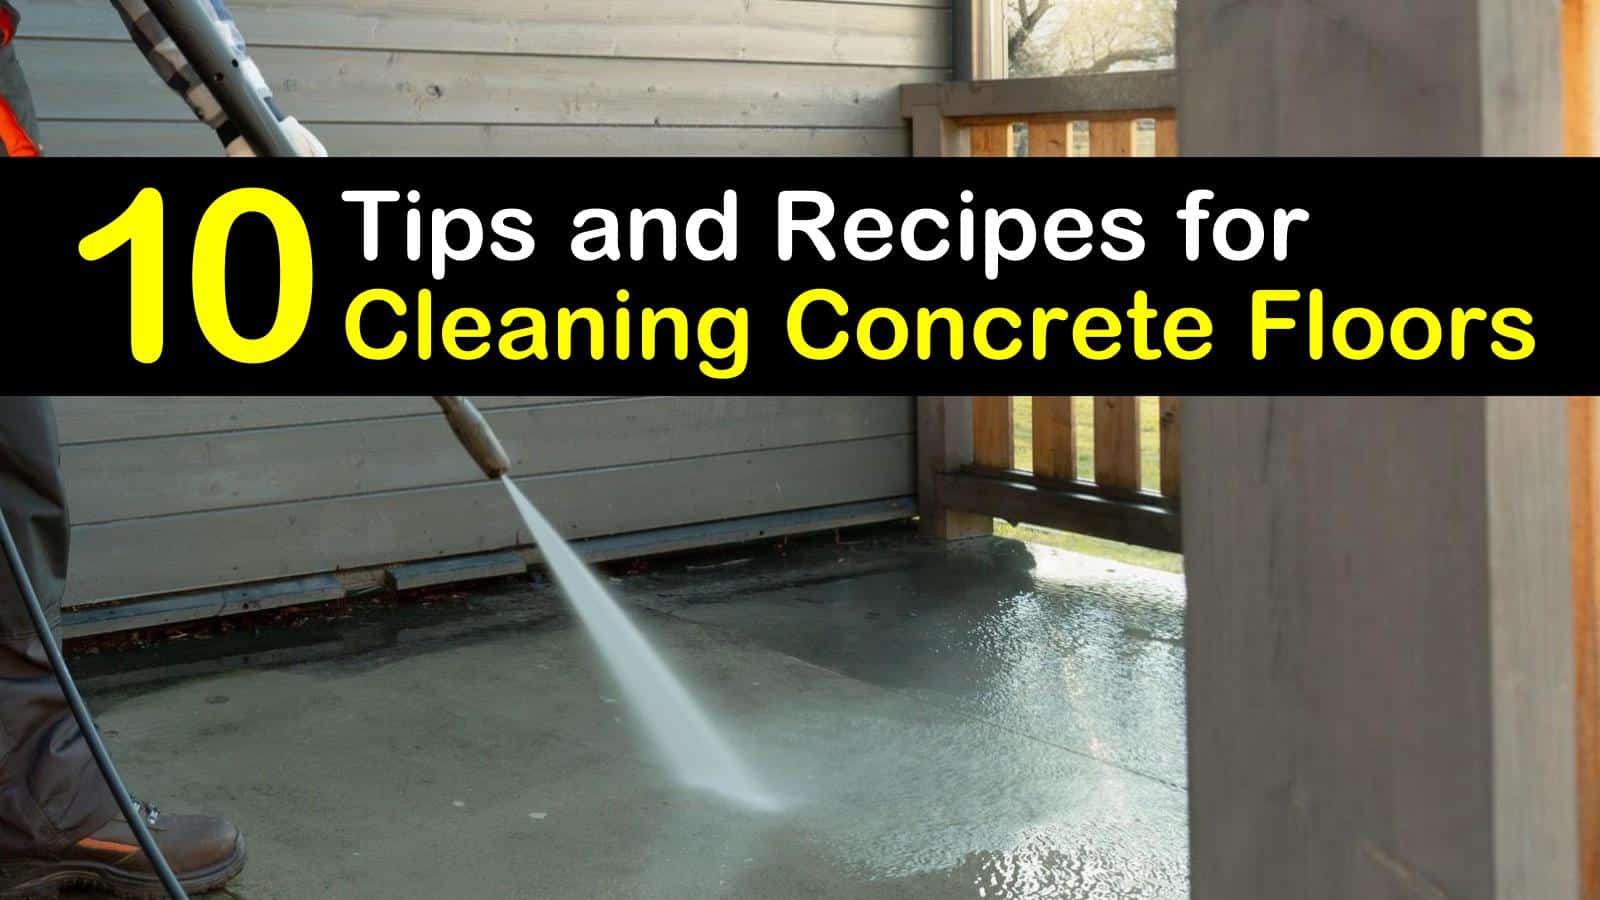 cleaning concrete floors titleimg1